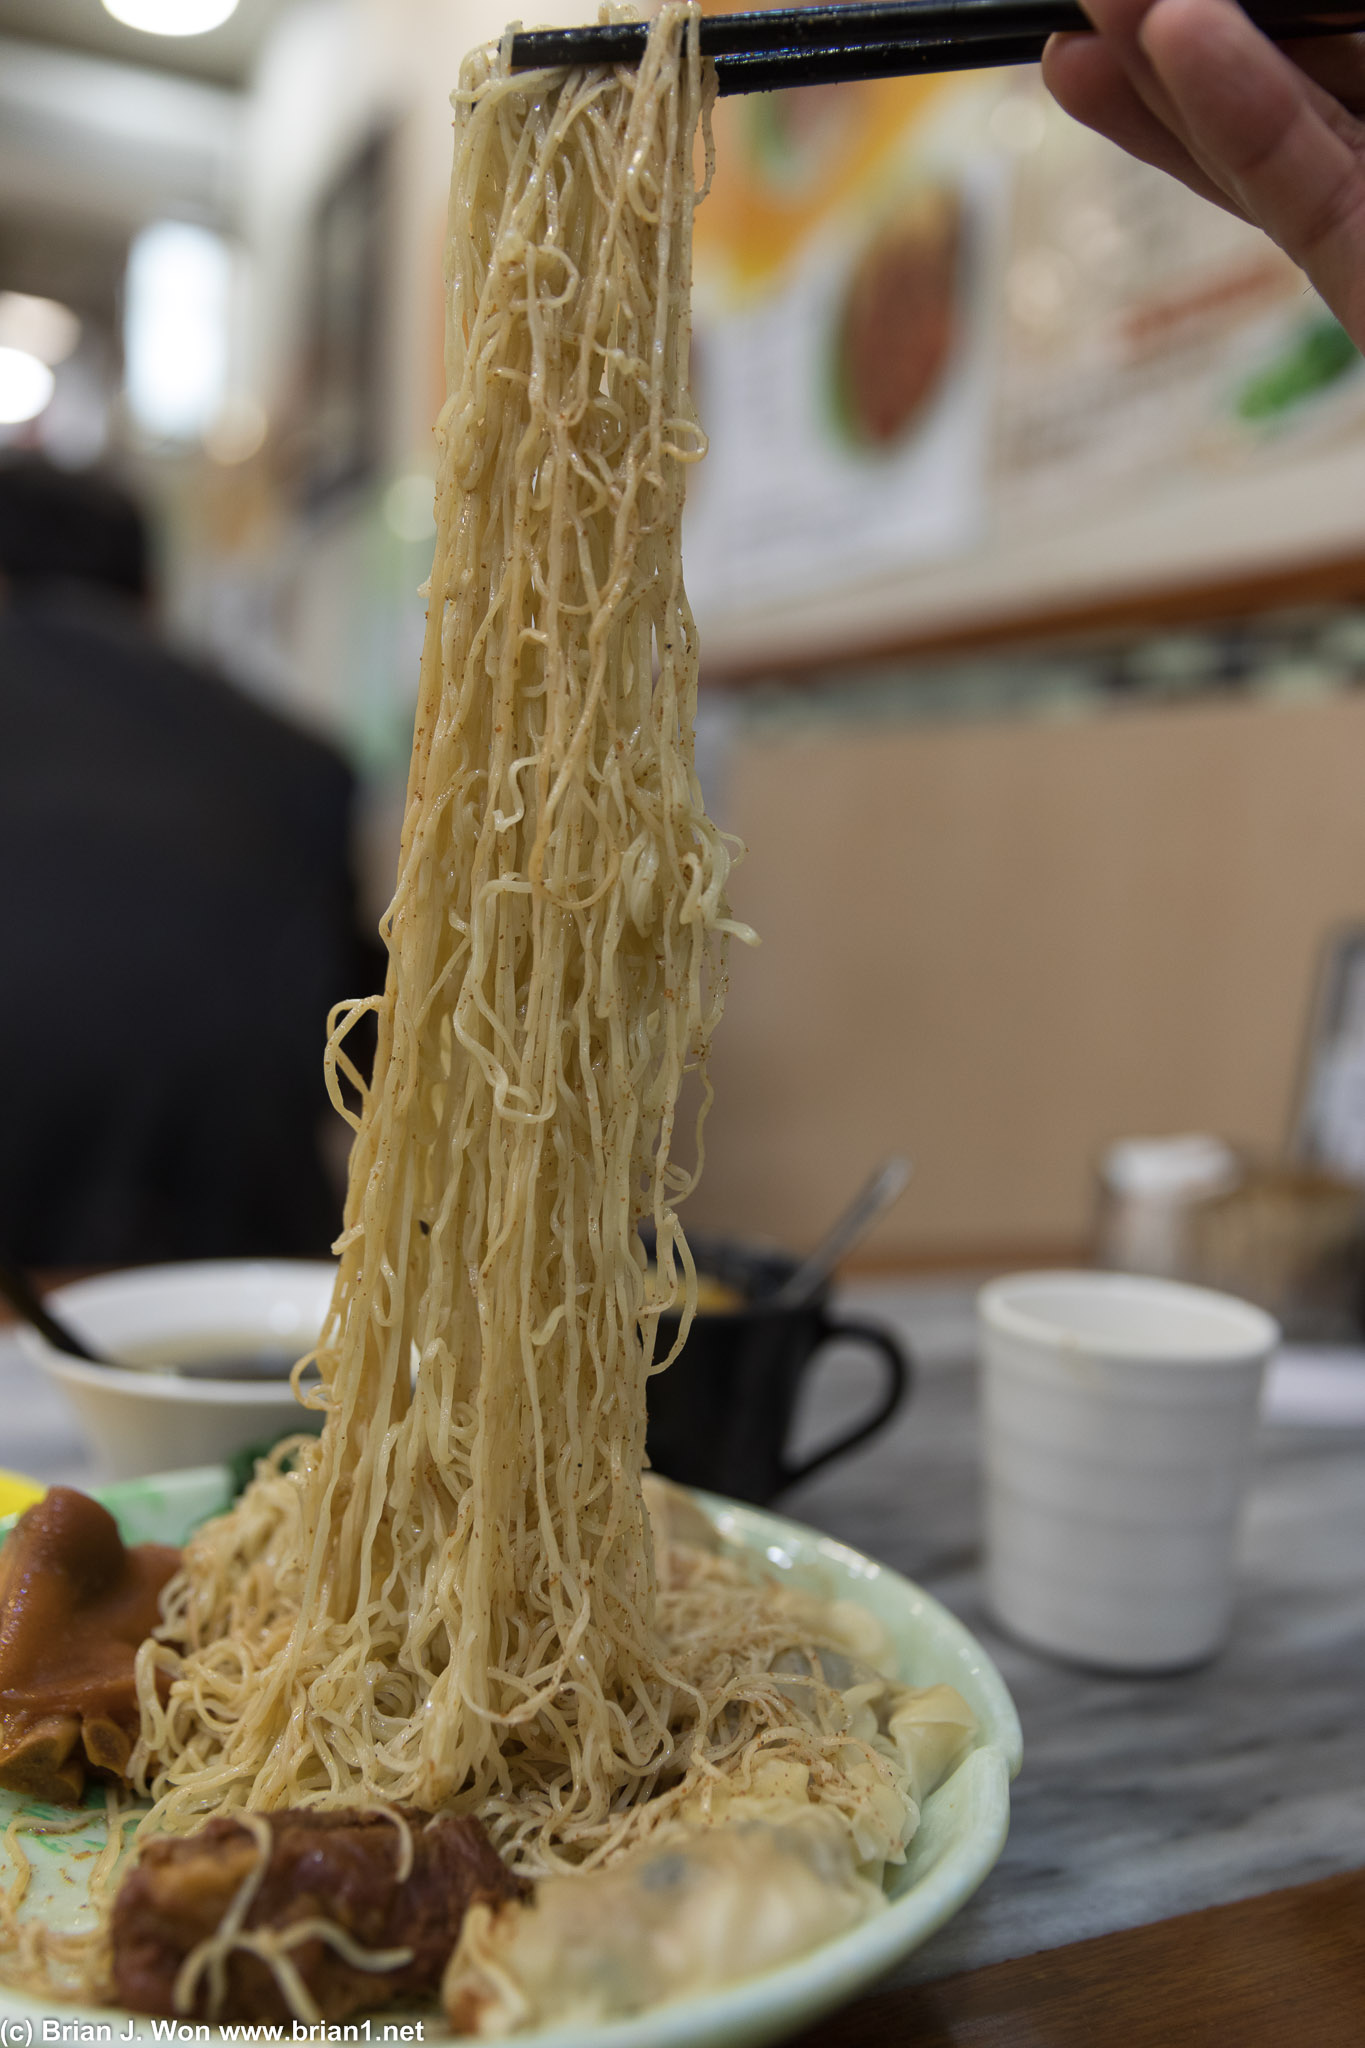 So many noodles.